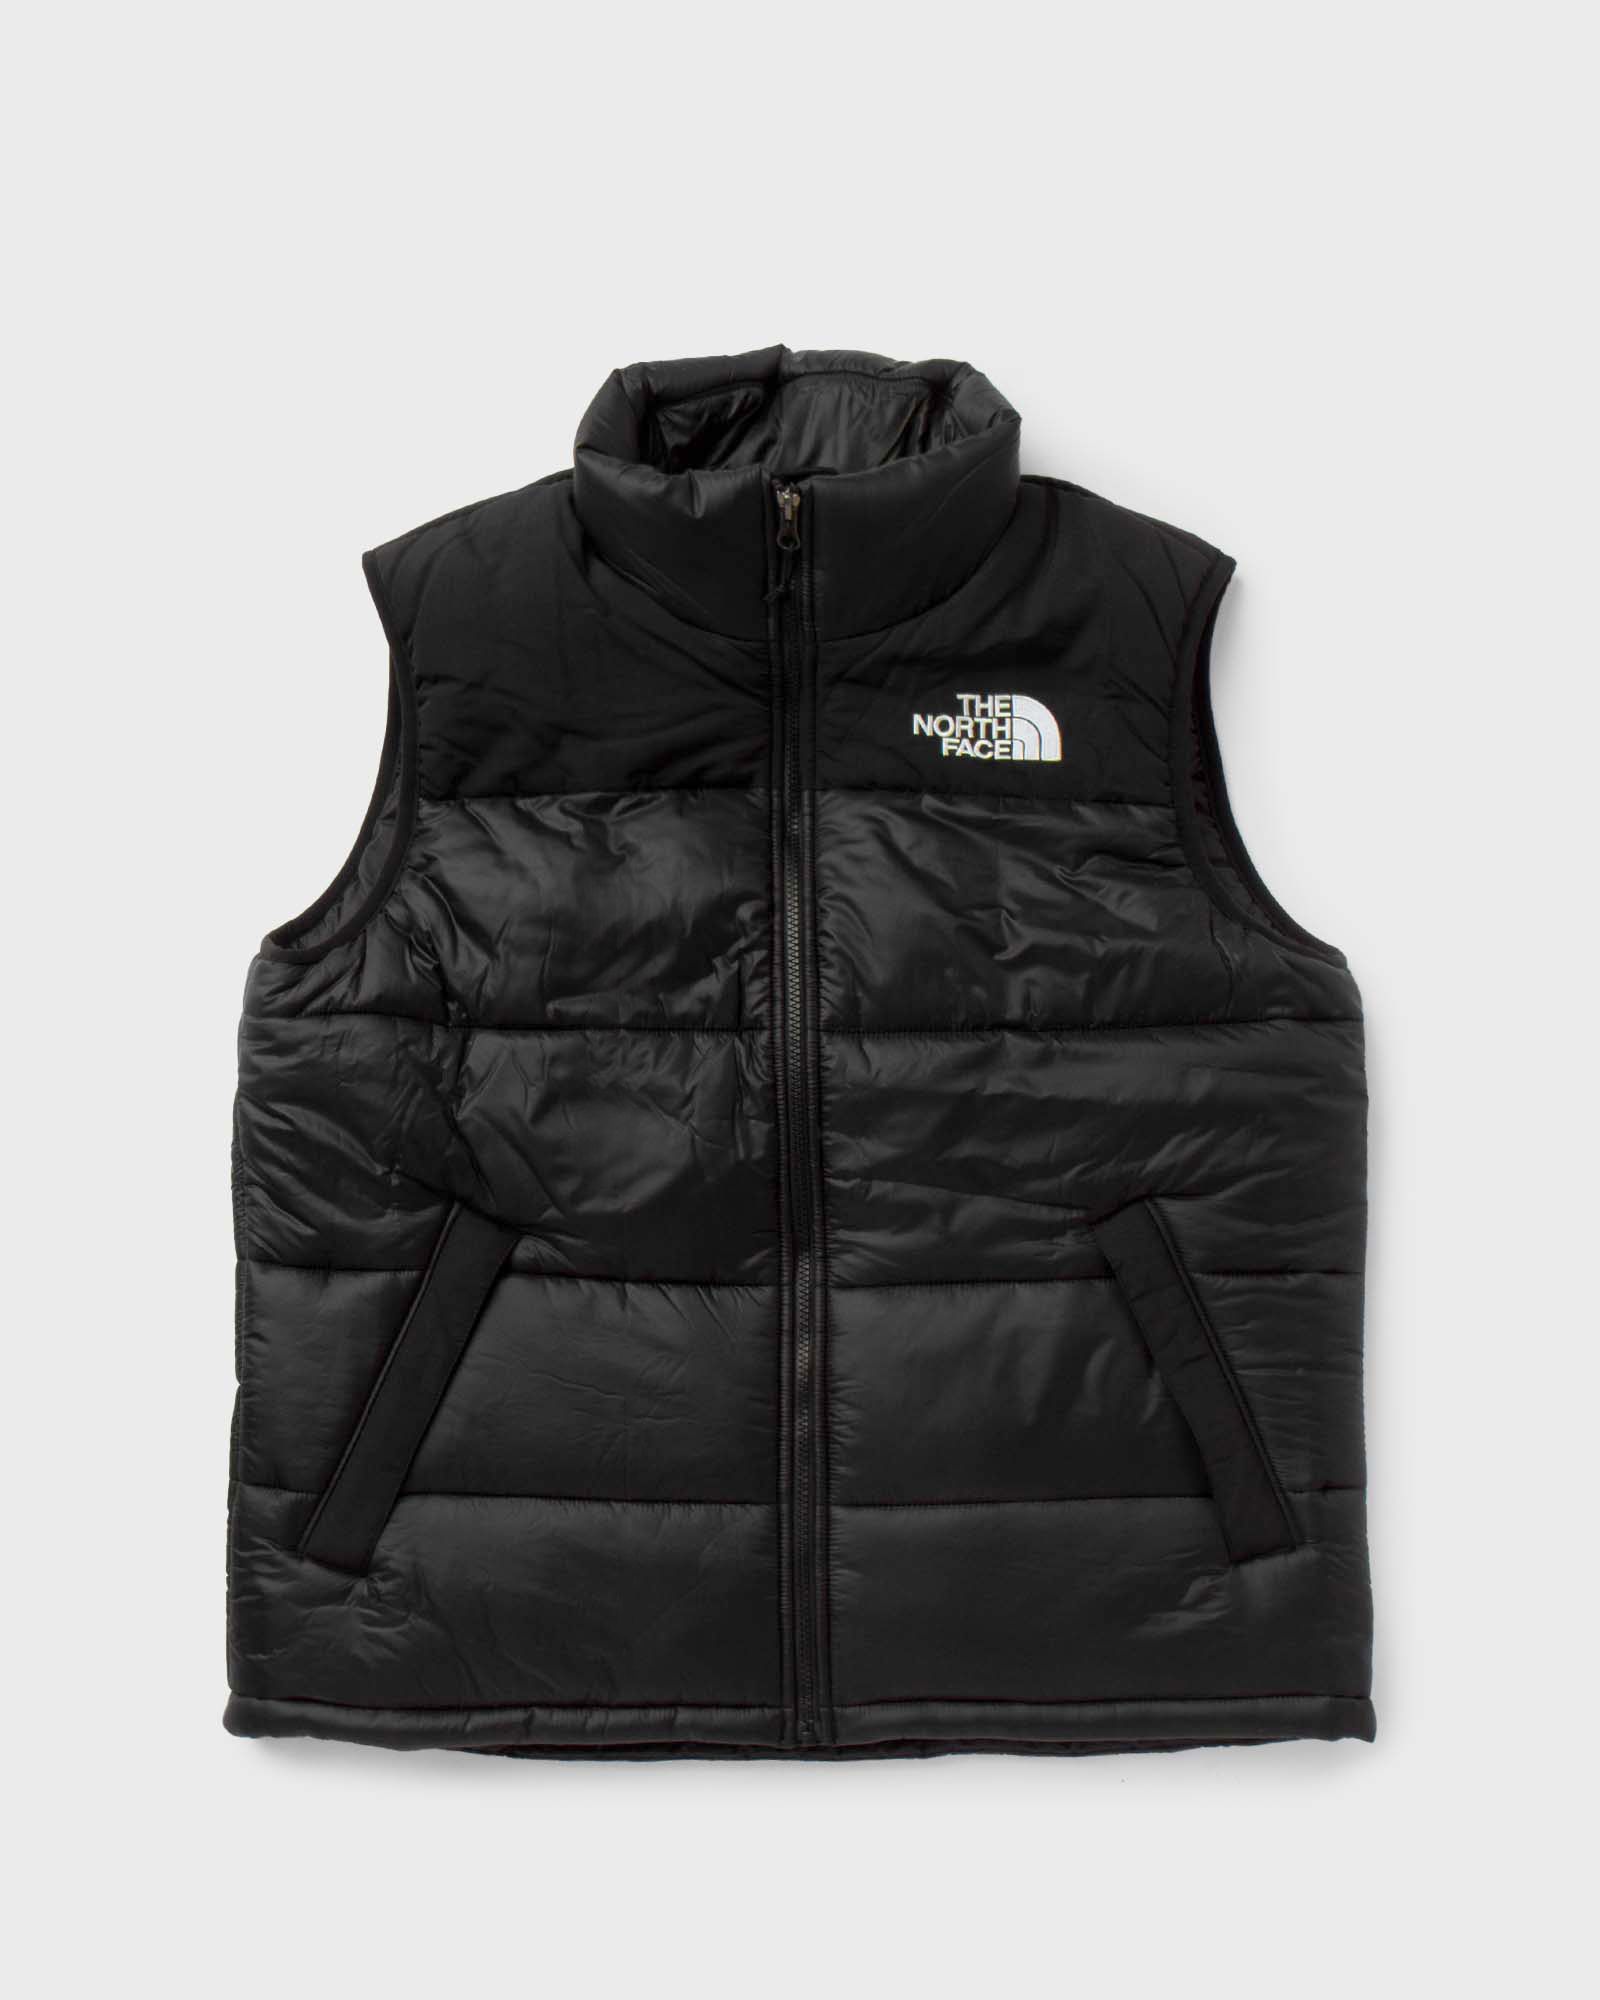 The North Face HIMALAYAN INSULATED VEST men Vests black in Größe:XL von The North Face